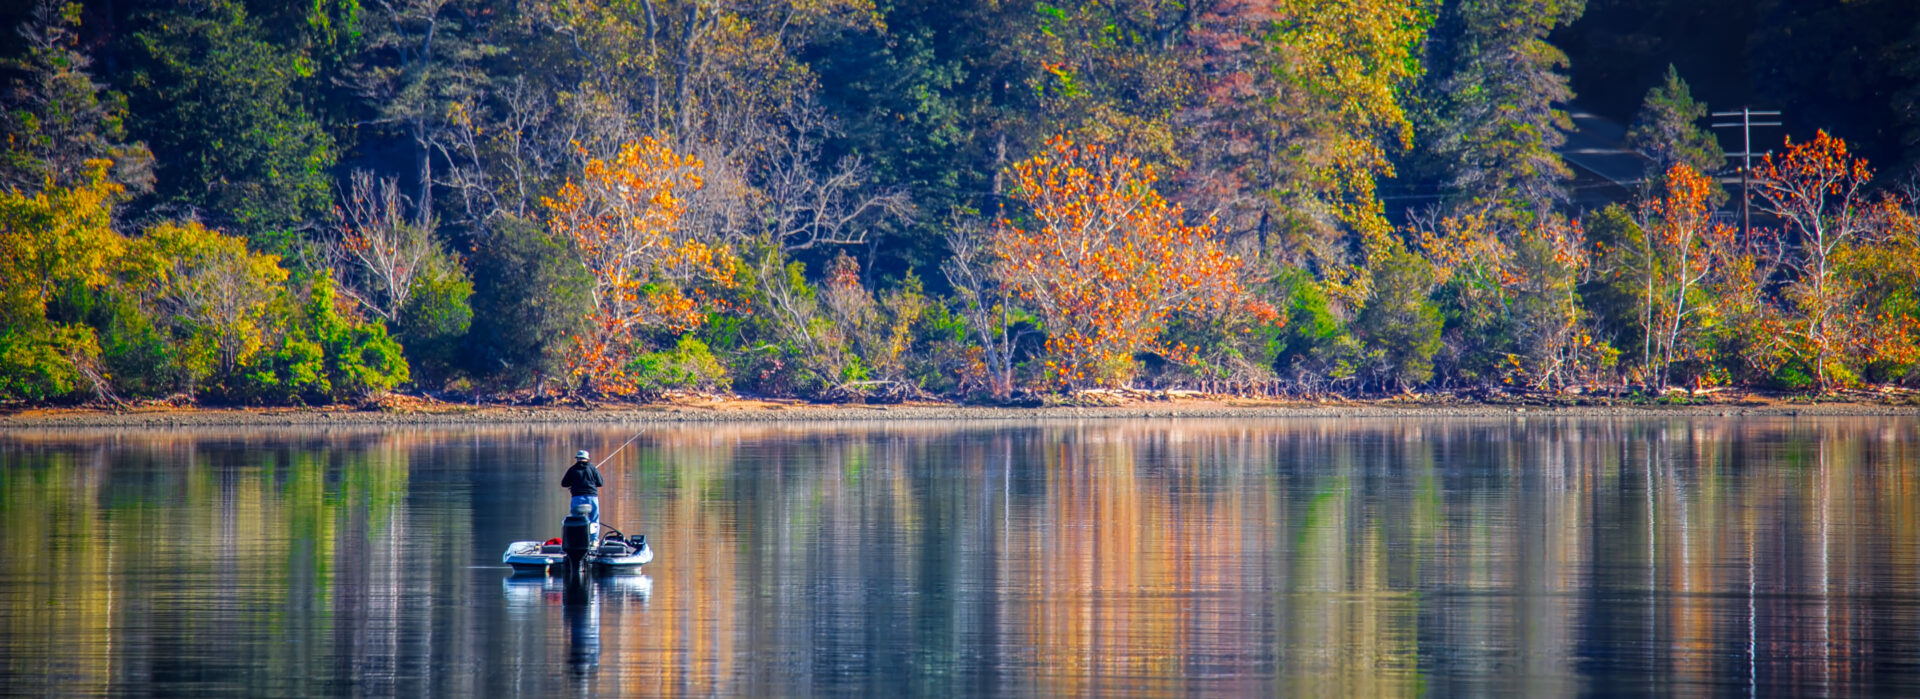 A man fishing by himself on a Virginia waterway with an autumn forest in the background.